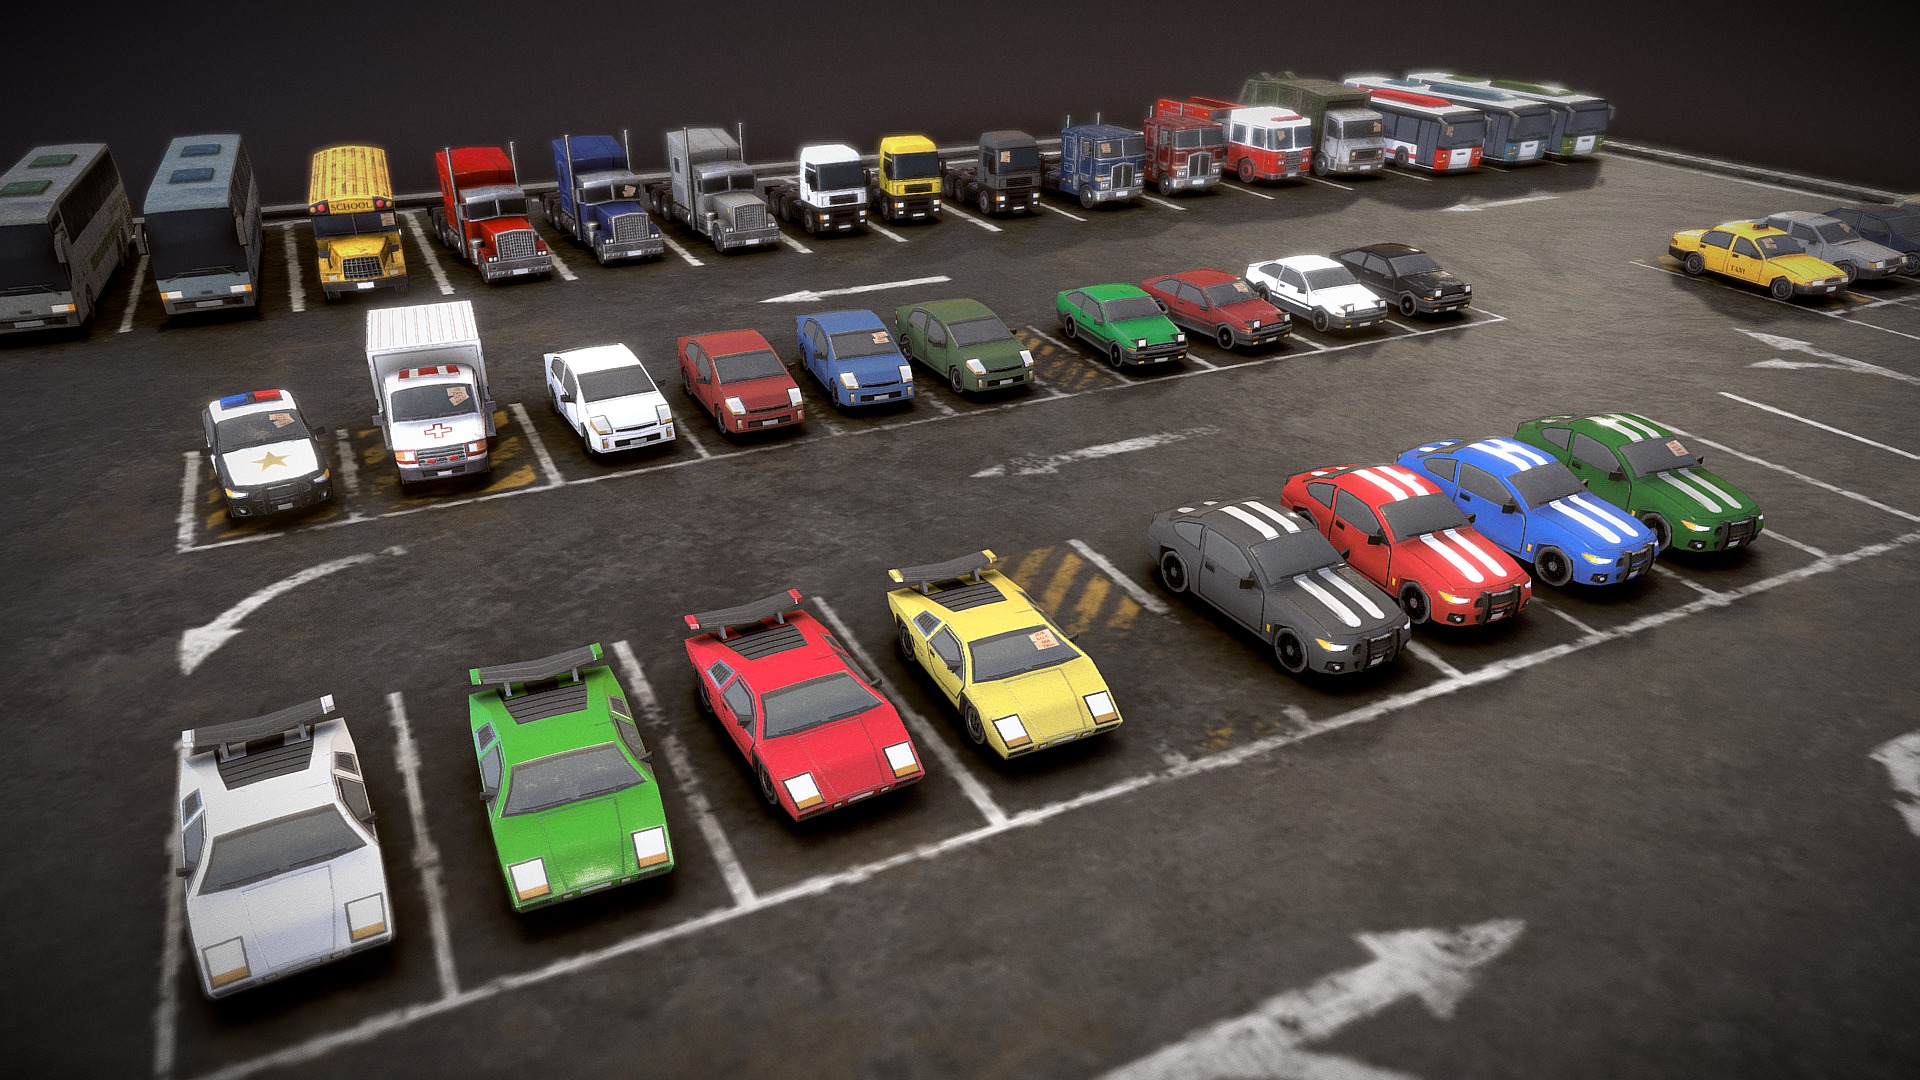 3D model Vehicle Pack – LowPoly PBR - This is a 3D model of the Vehicle Pack - LowPoly PBR. The 3D model is about a parking lot full of cars.